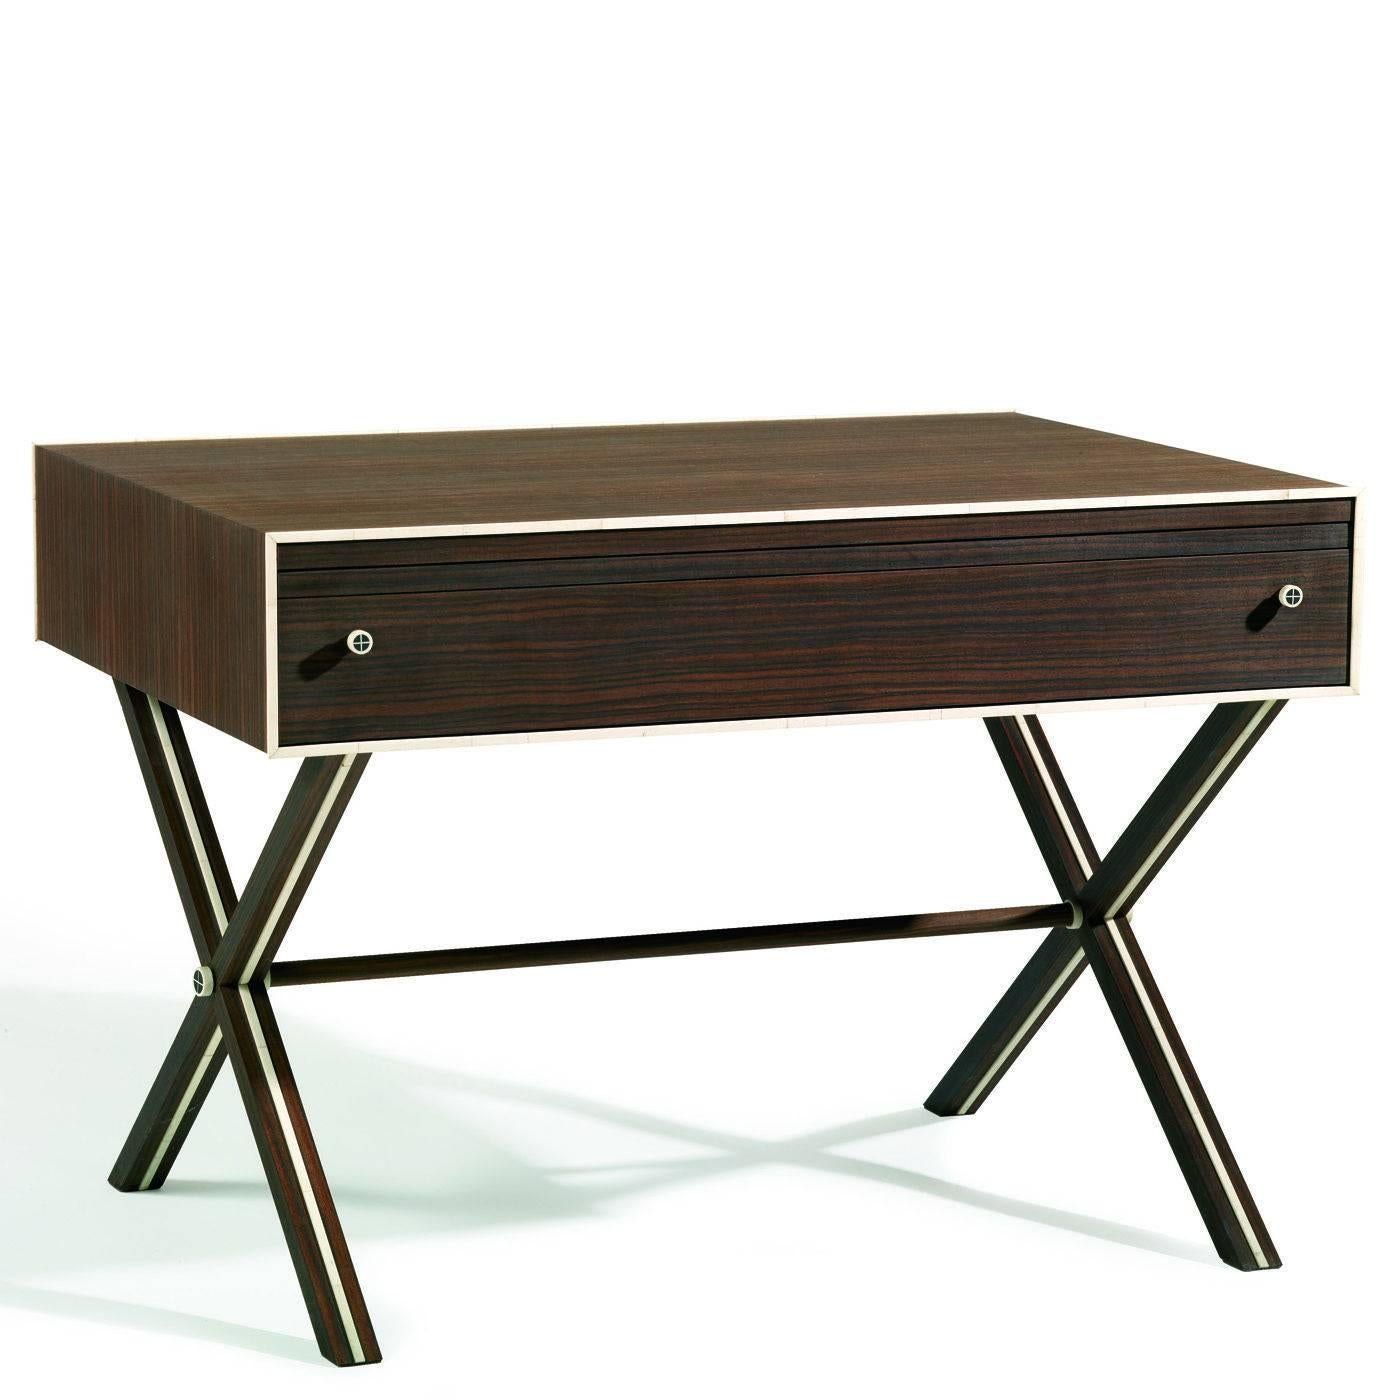 This elegant table is veneered in ebony Macassar wood. It features one drawer (with internal compartment) and an extractable surface. The exterior is embellished with horn details running around the edge of the front and inside the four crossing